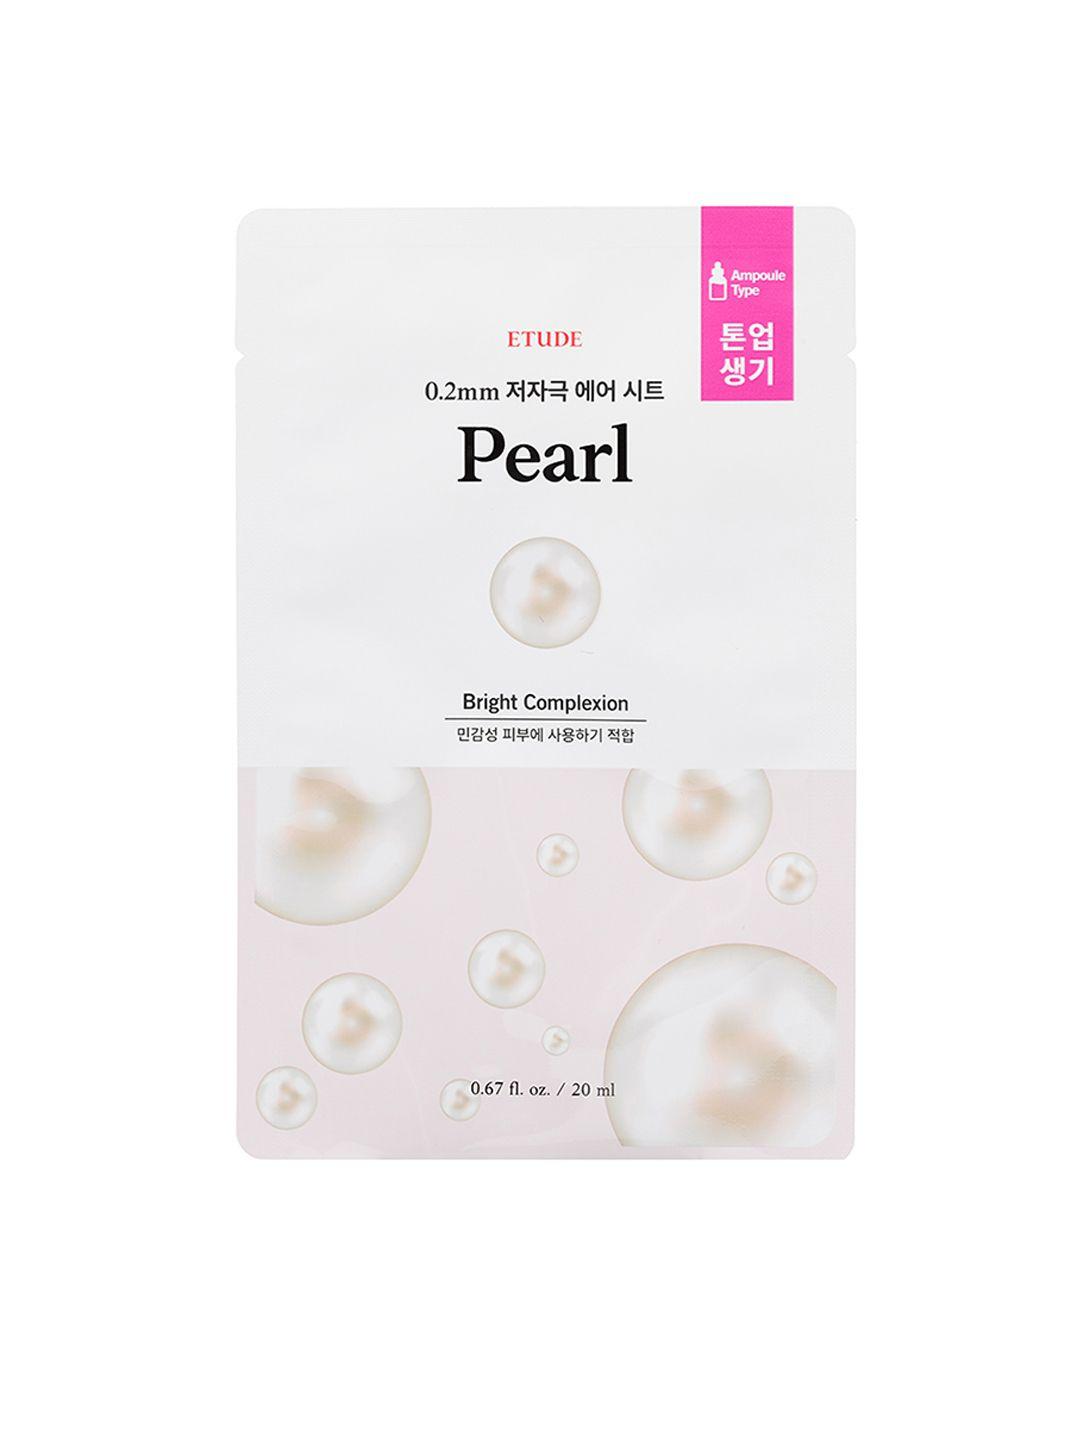 etude bright complexion 0.2mm air mask - pearl